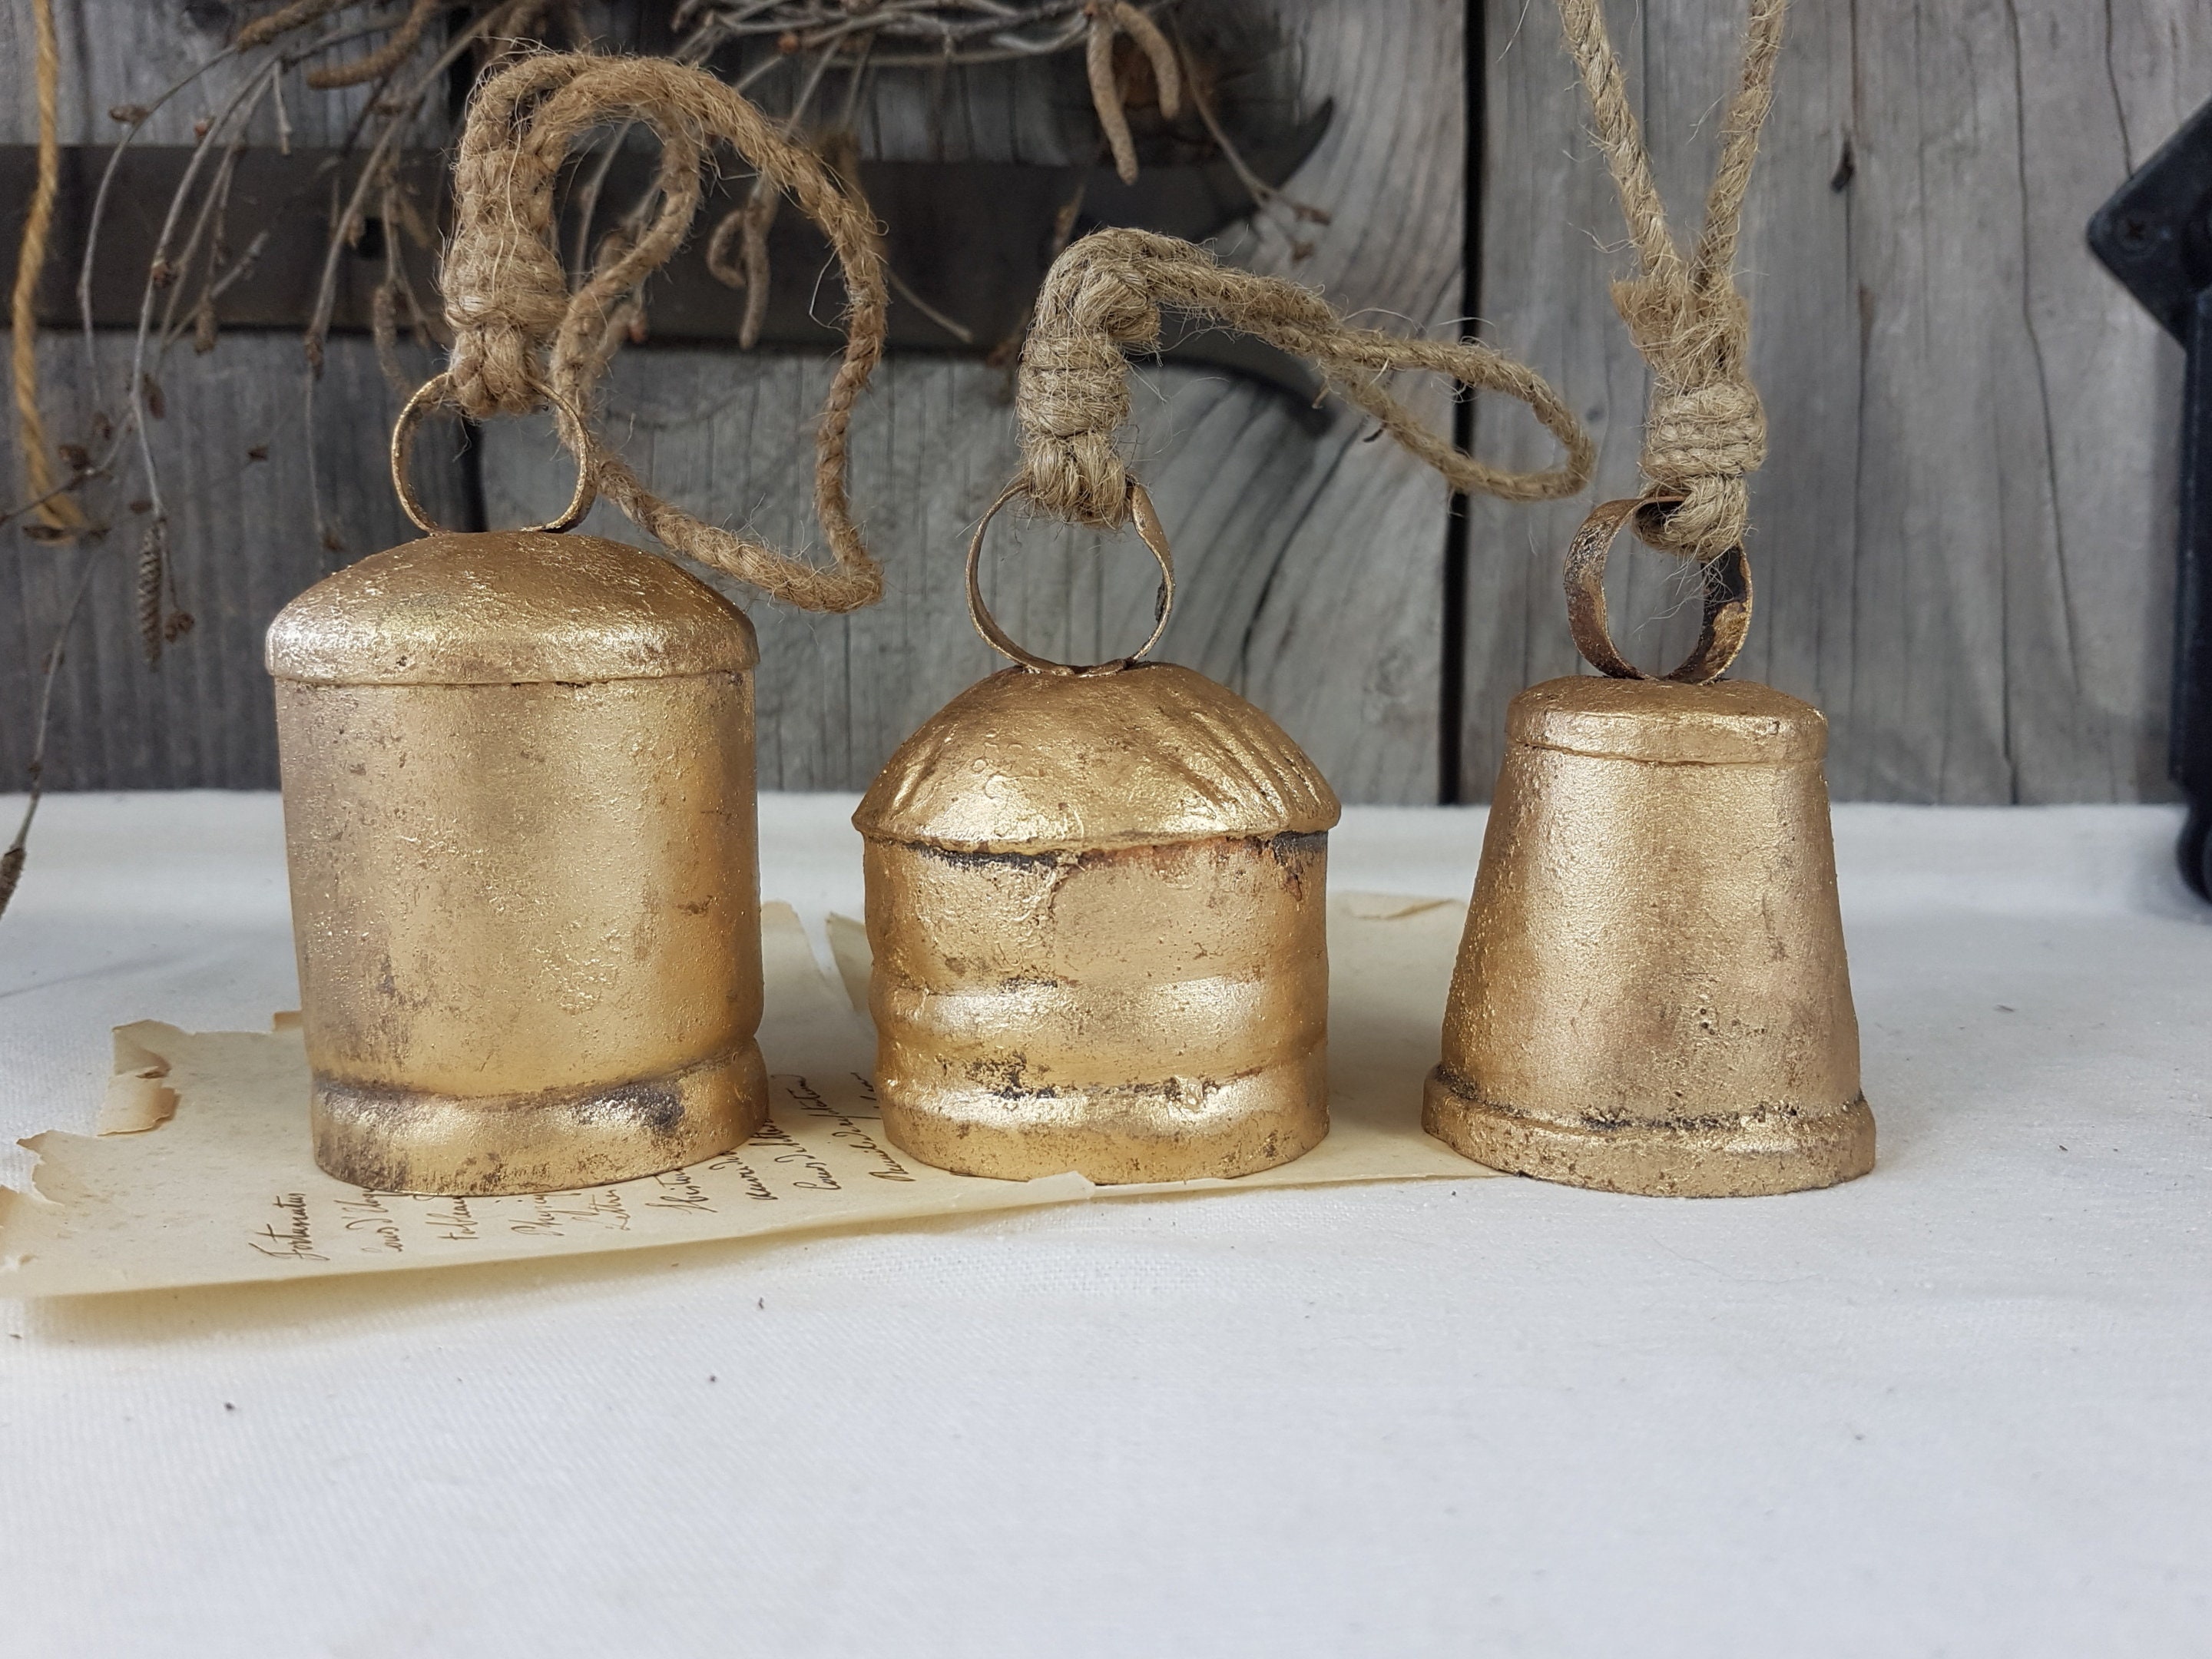 HIGHBIX Complete Set of 15 Giant Harmony Cow Bells Vintage Handmade Rustic  Lucky Cow Bells on Rope With Pole and Wall Mount 